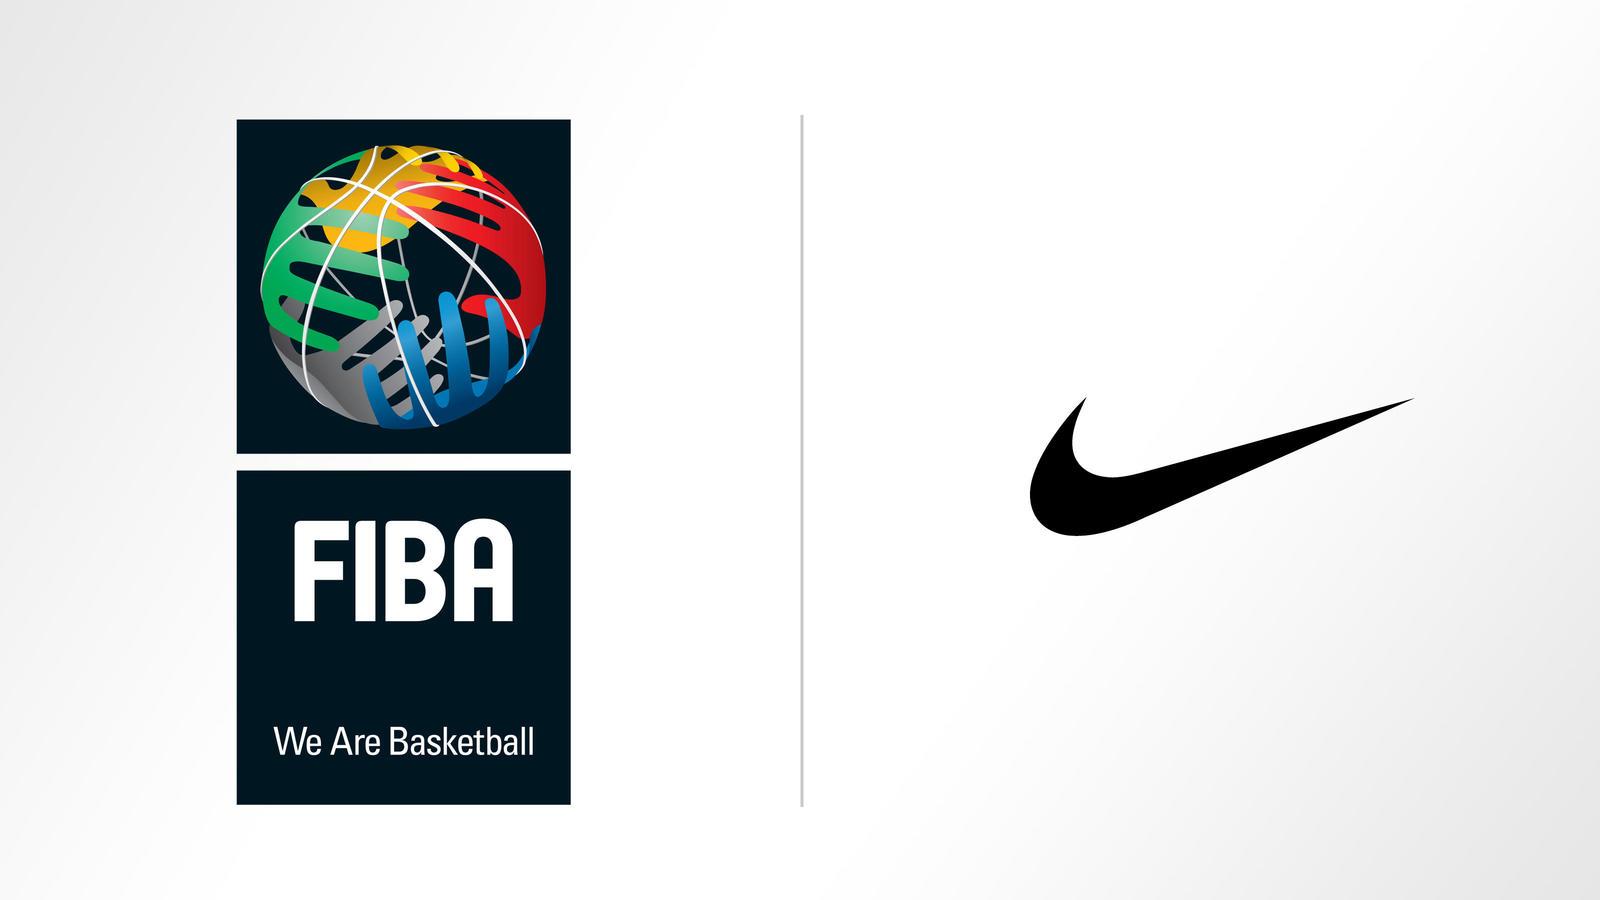 Nike and FIBA Partner to Spread Basketball All Over the World